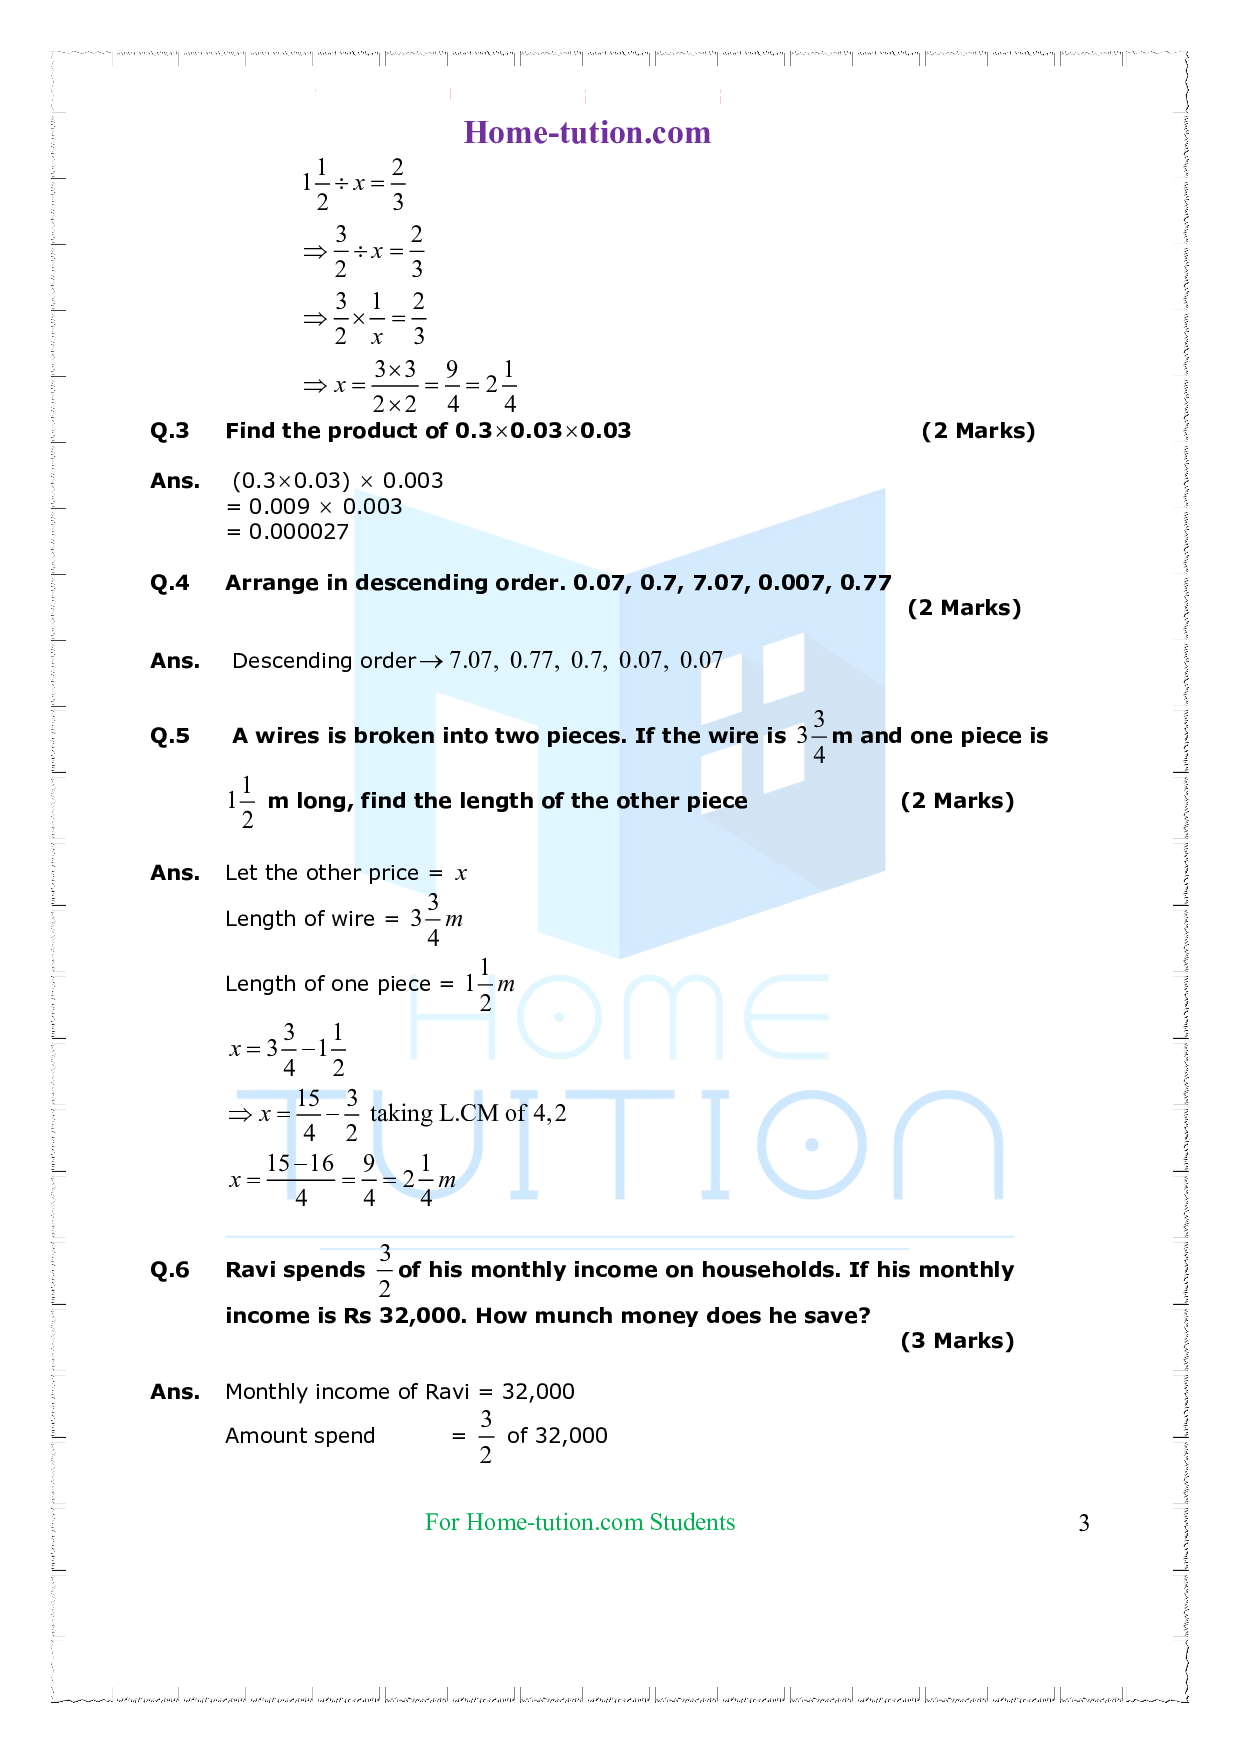 Extra Questions on Class 7 Maths Chapter 2 Fractions and Decimals